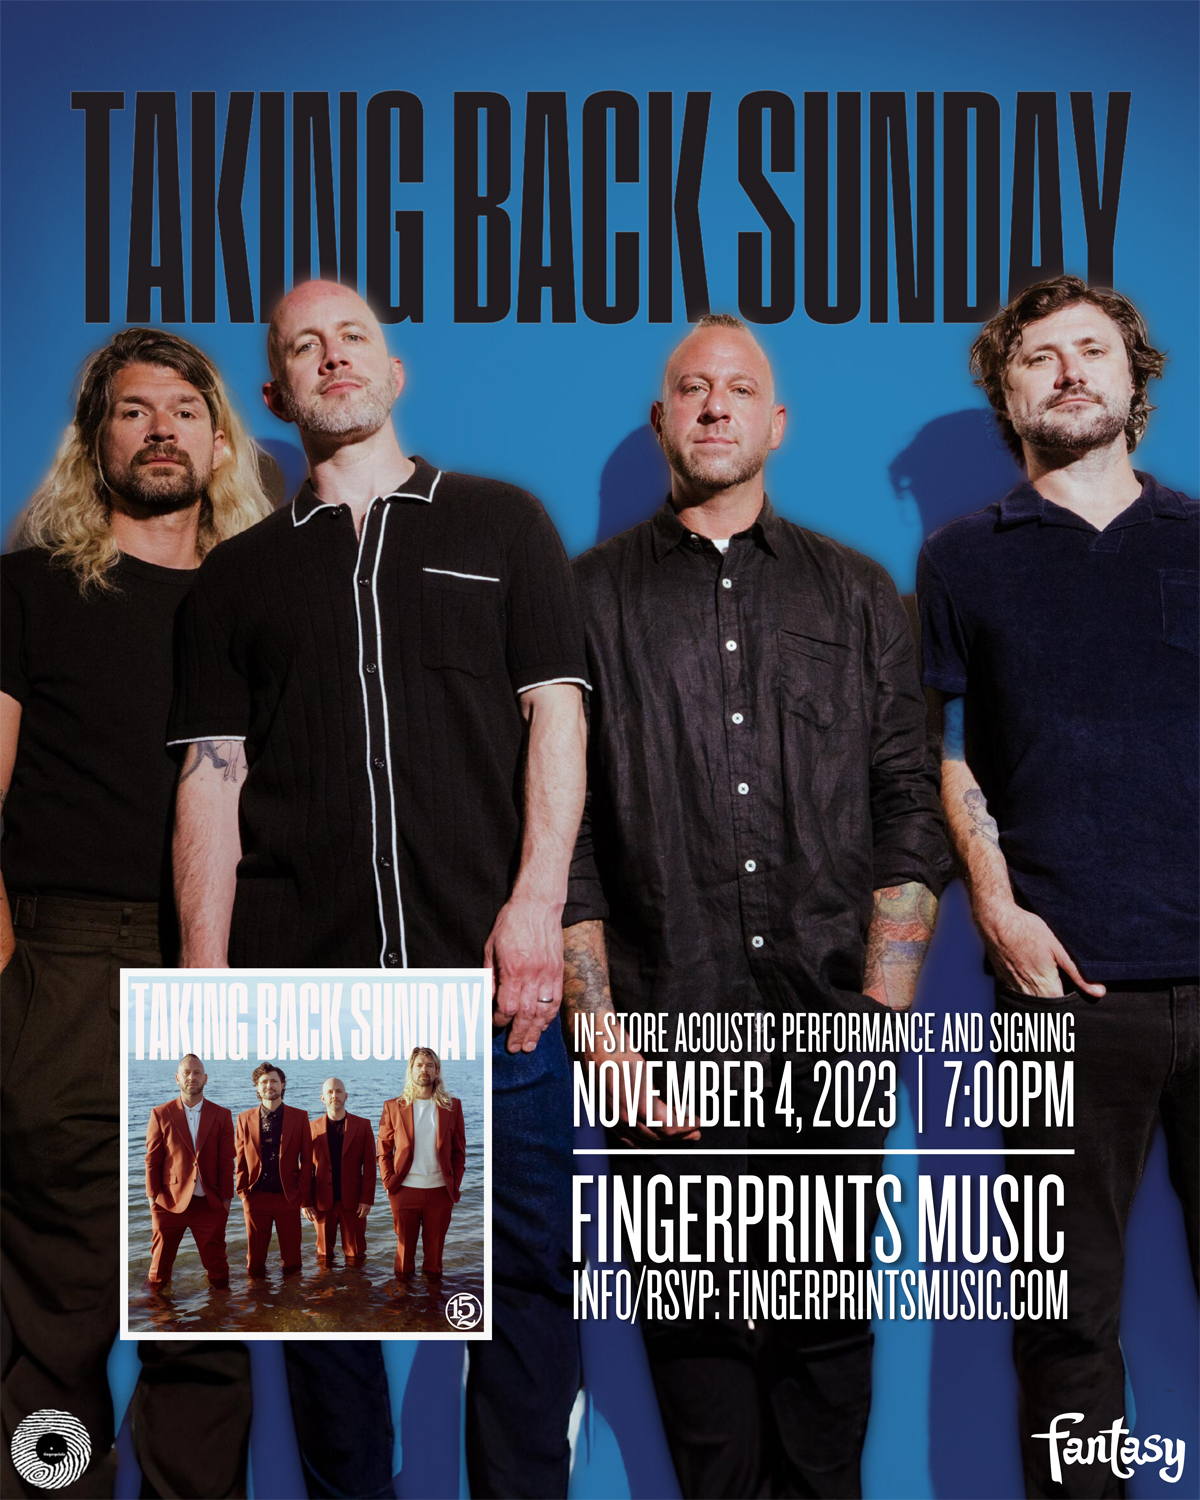 Taking Back Sunday Acoustic Performance and Signing 11/4 at 7pm